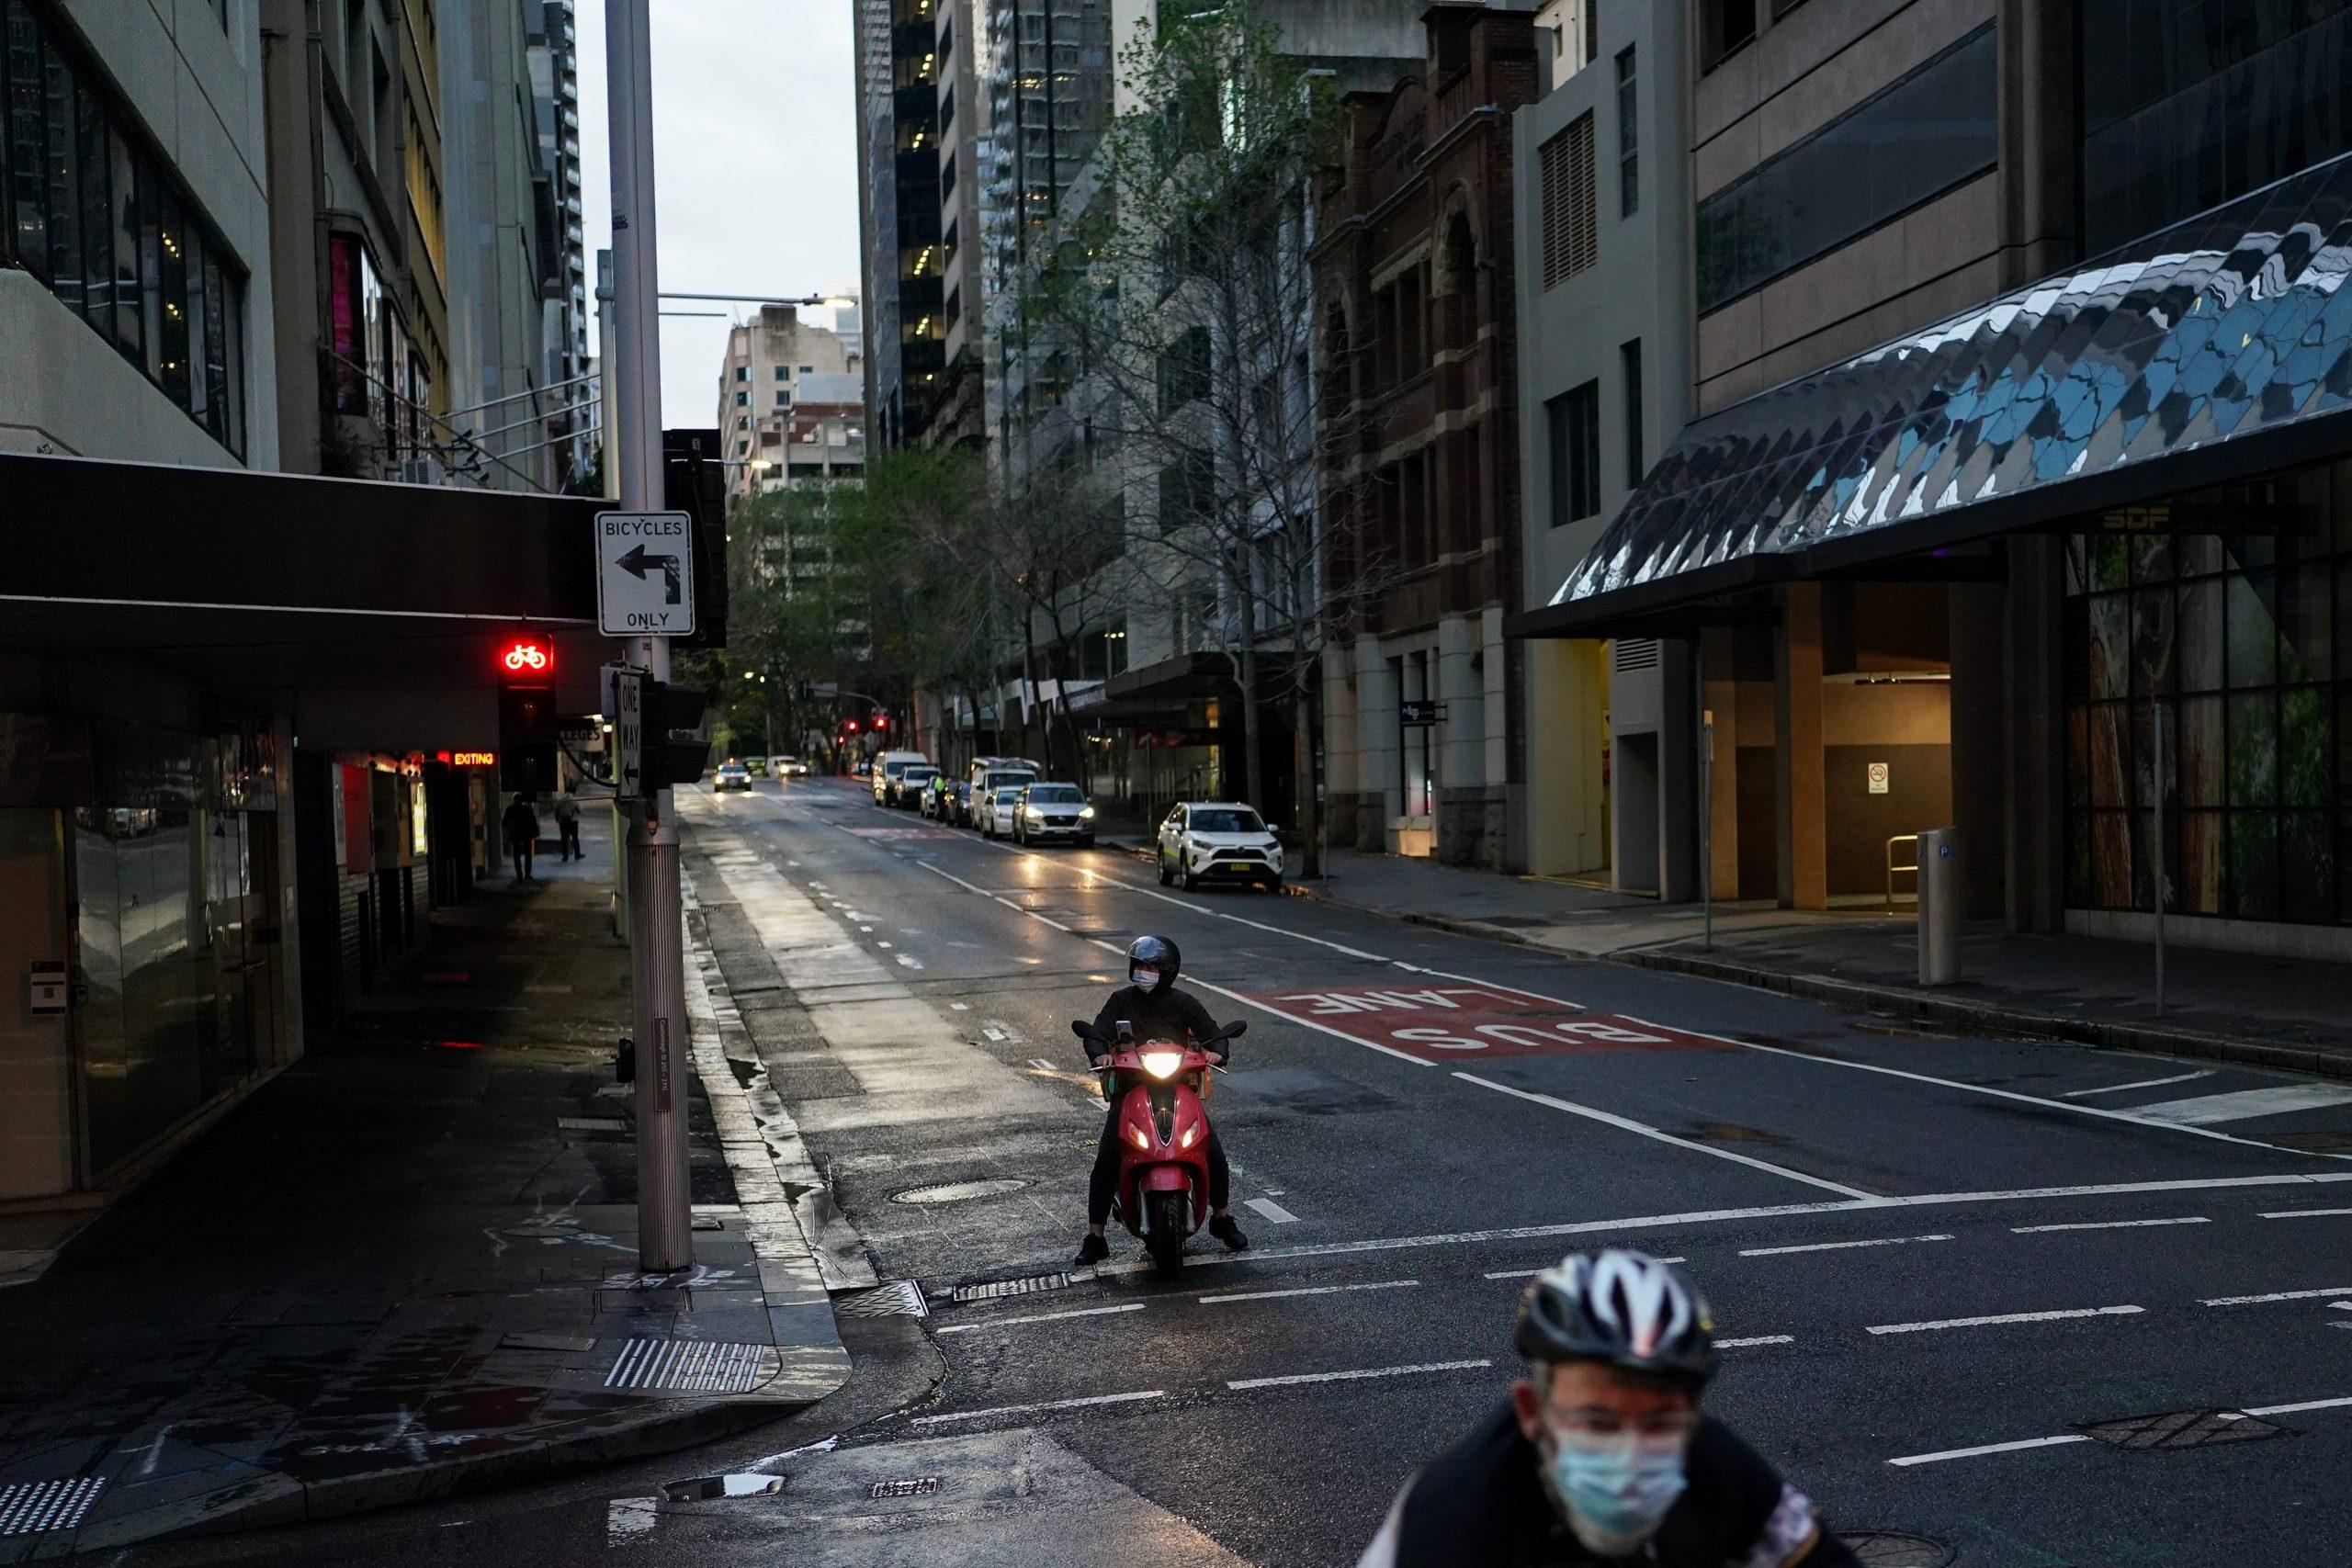 A delivery courier on a motorbike and a cyclist, both wearing protective face masks, navigate the city centre during a lockdown to curb the spread of the Covid-19 outbreak in Sydney, Australia, Sept 14. Photo: Reuters